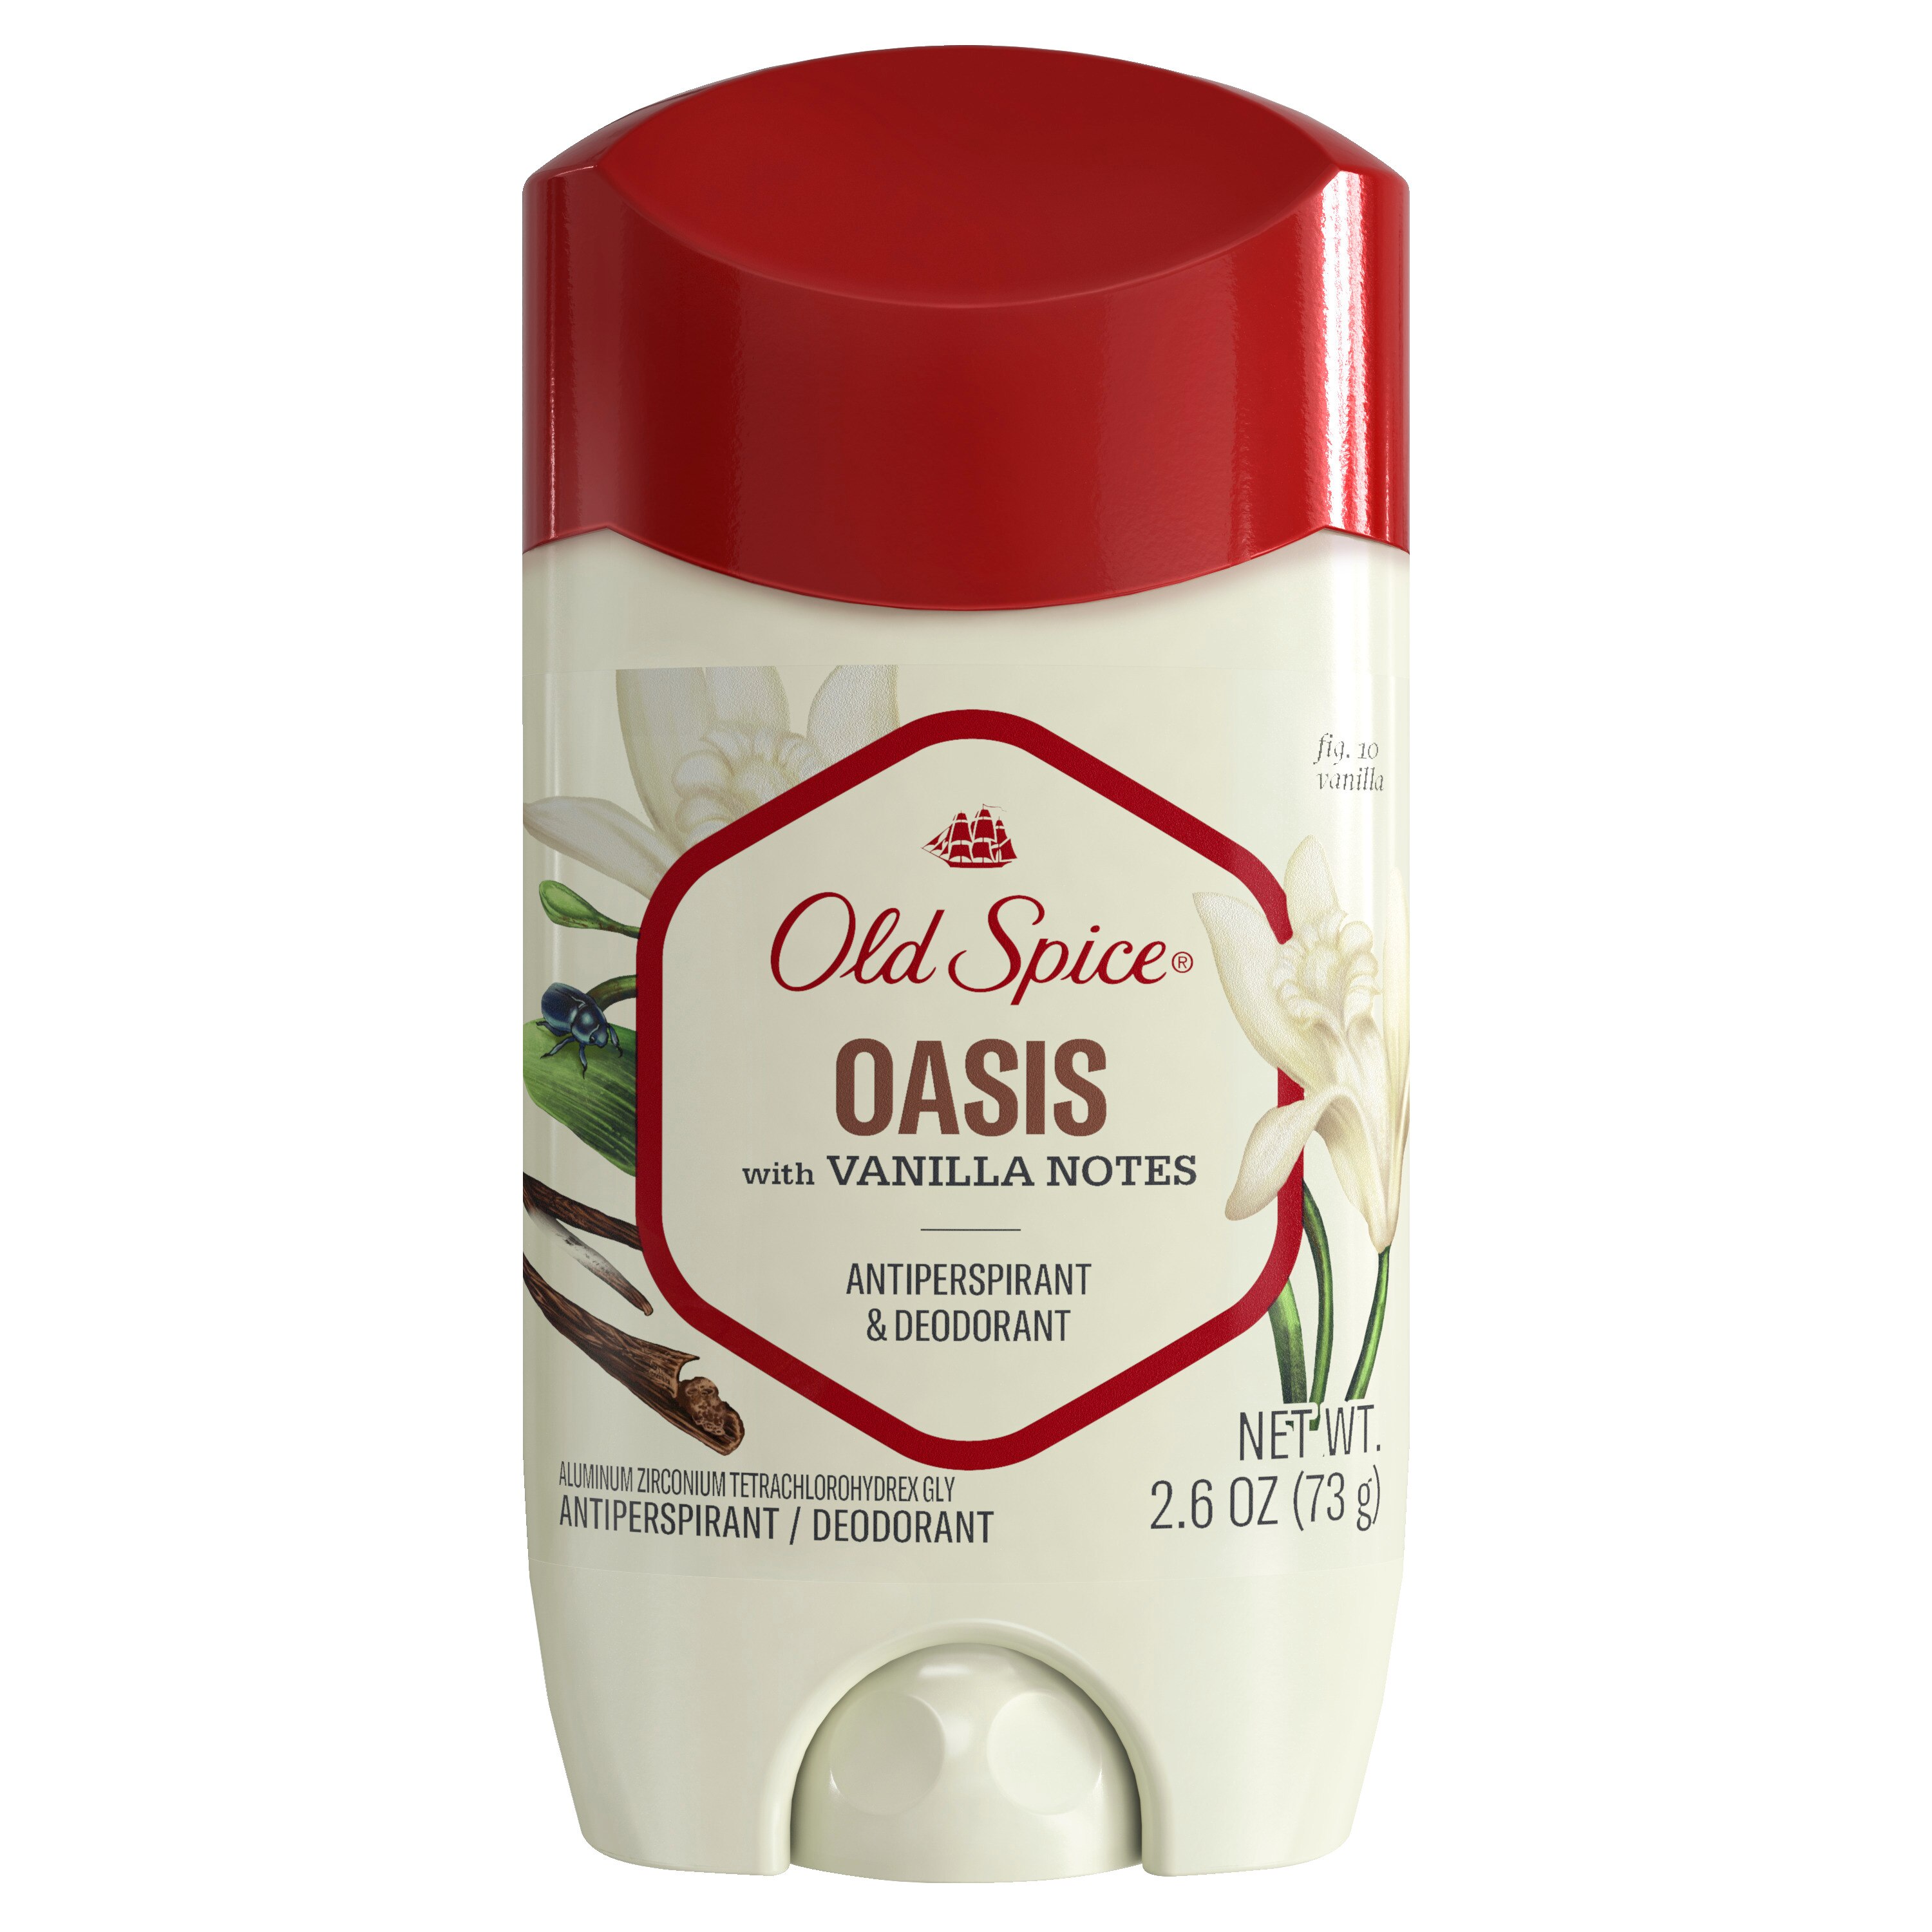 Old Spice Invisible Solid Antiperspirant Deodorant for Men, Oasis with Vanilla Notes Scent Inspired by Nature, 2.6 Oz